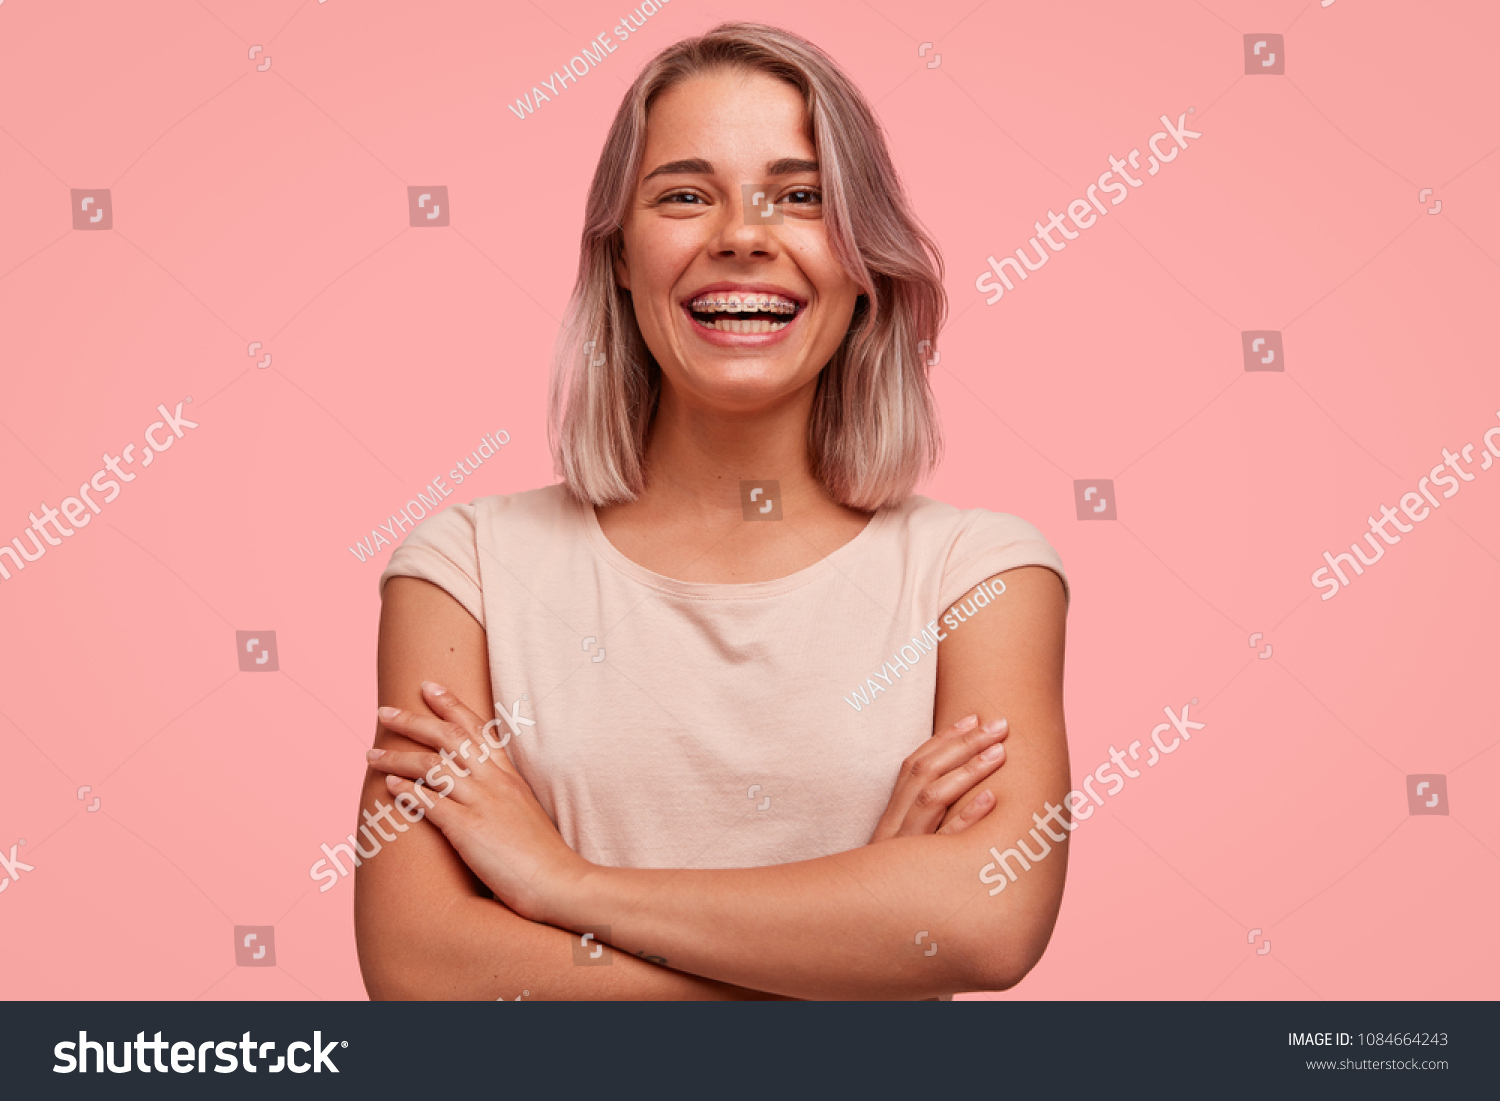 People, happiness and facial expressions concept. Pretty young woman with broad shining smile, keeps hands crossed, being in high spirit, wears braces on teeth, poses alone against pink background #1084664243